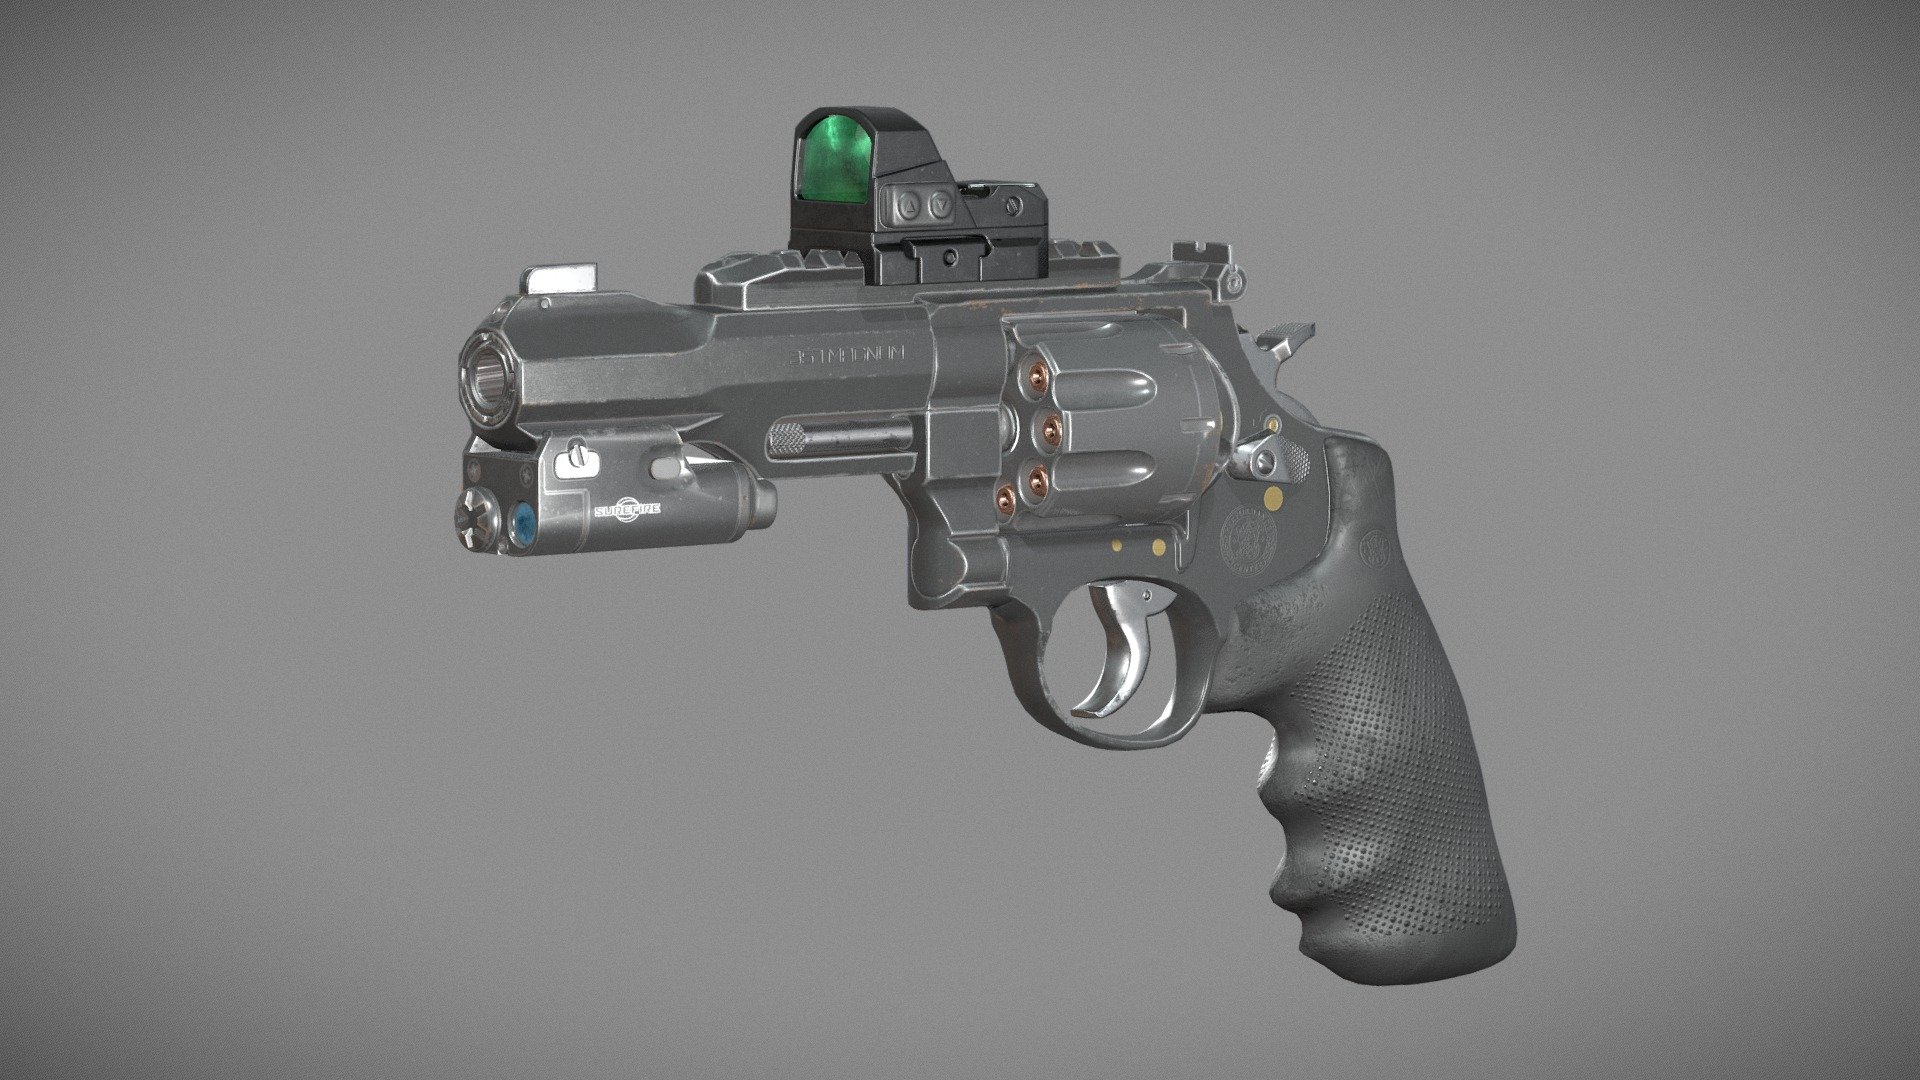 The game ready model of the Revolver S&amp;W M&amp;P R8 357 Magnum. 




Polycaunt:

revolver - 15248,
bullets - 8448,
flashlight - 3240,
scope - 3962,
glass - 128,
laser - 2,
all - 31028




5 PBR texture sets:

revolver - 4096x4096,
flashlight - 2048x2048,
scope - 2048x2048,
glass - 512x512,
laser - 256x256

Modeling and UV in Blender; Bake in Marmoset Toolbag, Texturing in SP; Render in Marmoset Toolbag.

You can view the renderings on: https://www.artstation.com/alexandershevchenko - Revolver S&W M&P R8 357 Magnum - 3D model by Alexander Shevchenko (@alexshevart) 3d model